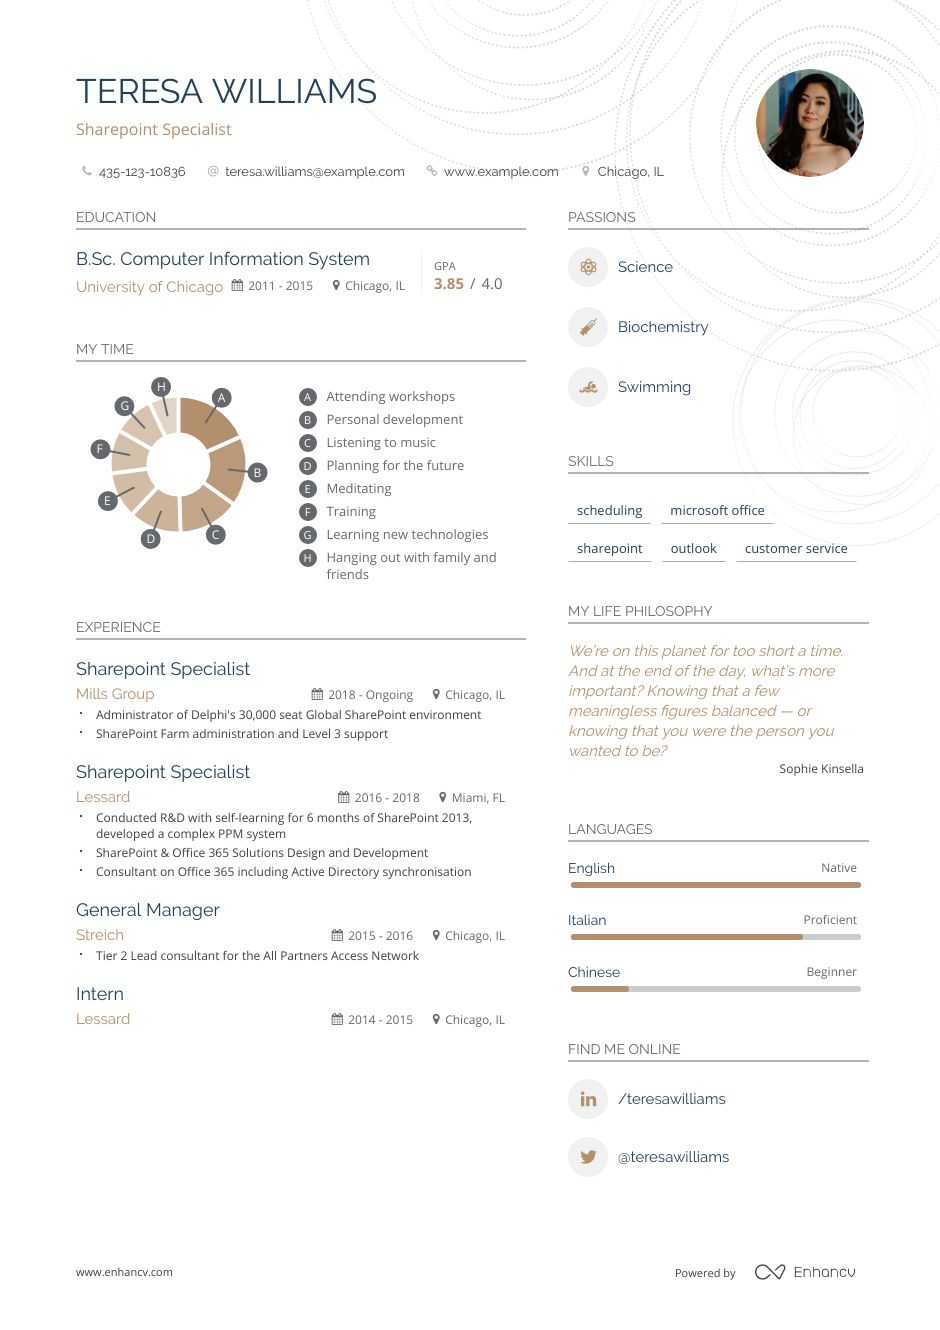 Sharepoint Specialist Resume Examples And Skills You Need To Get Hired